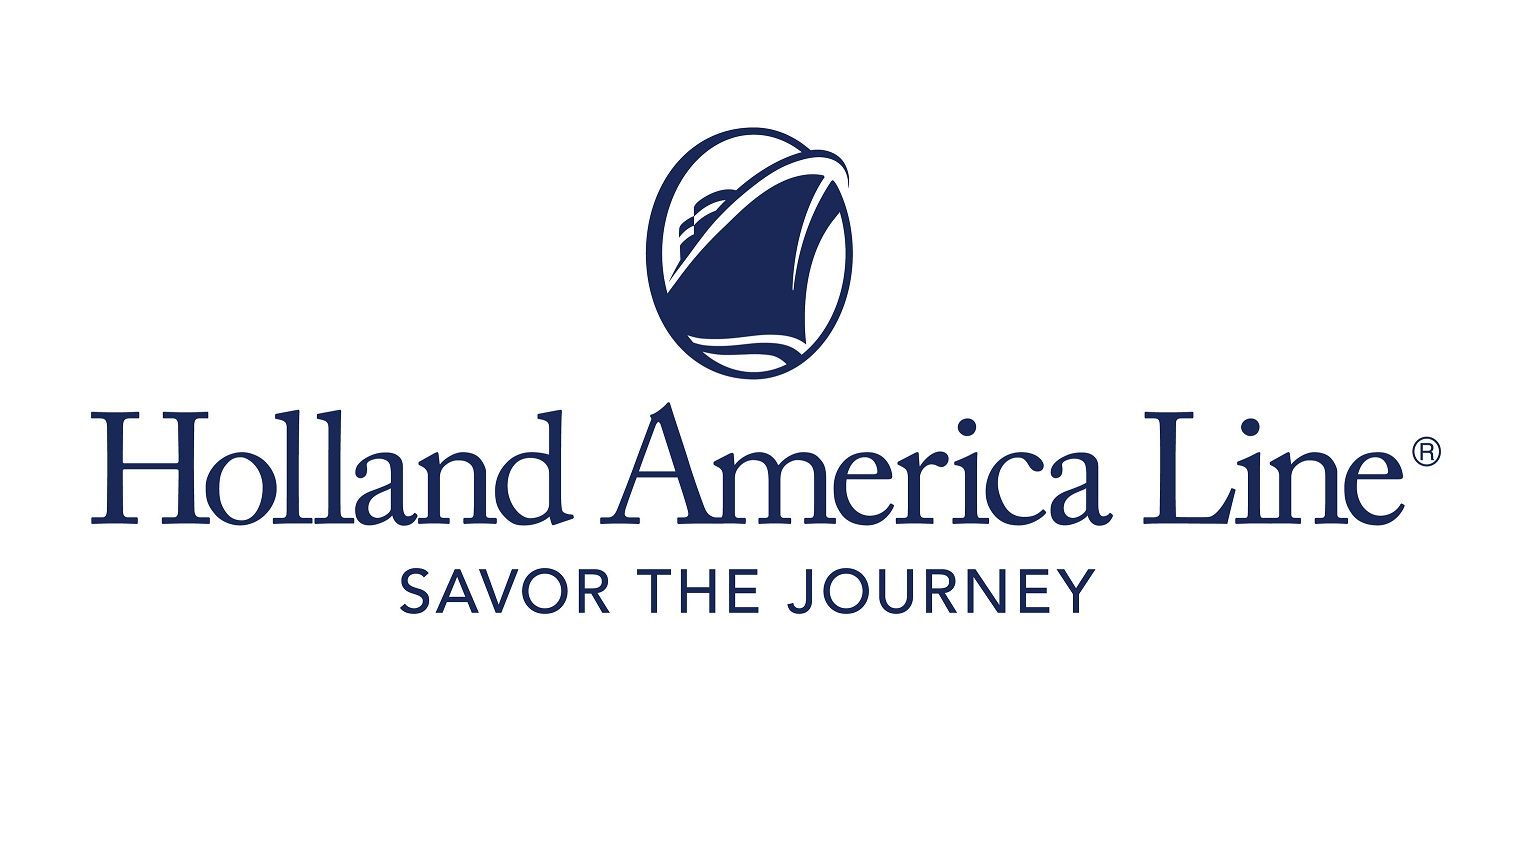 Holland America Line names new Vice President of Marketing